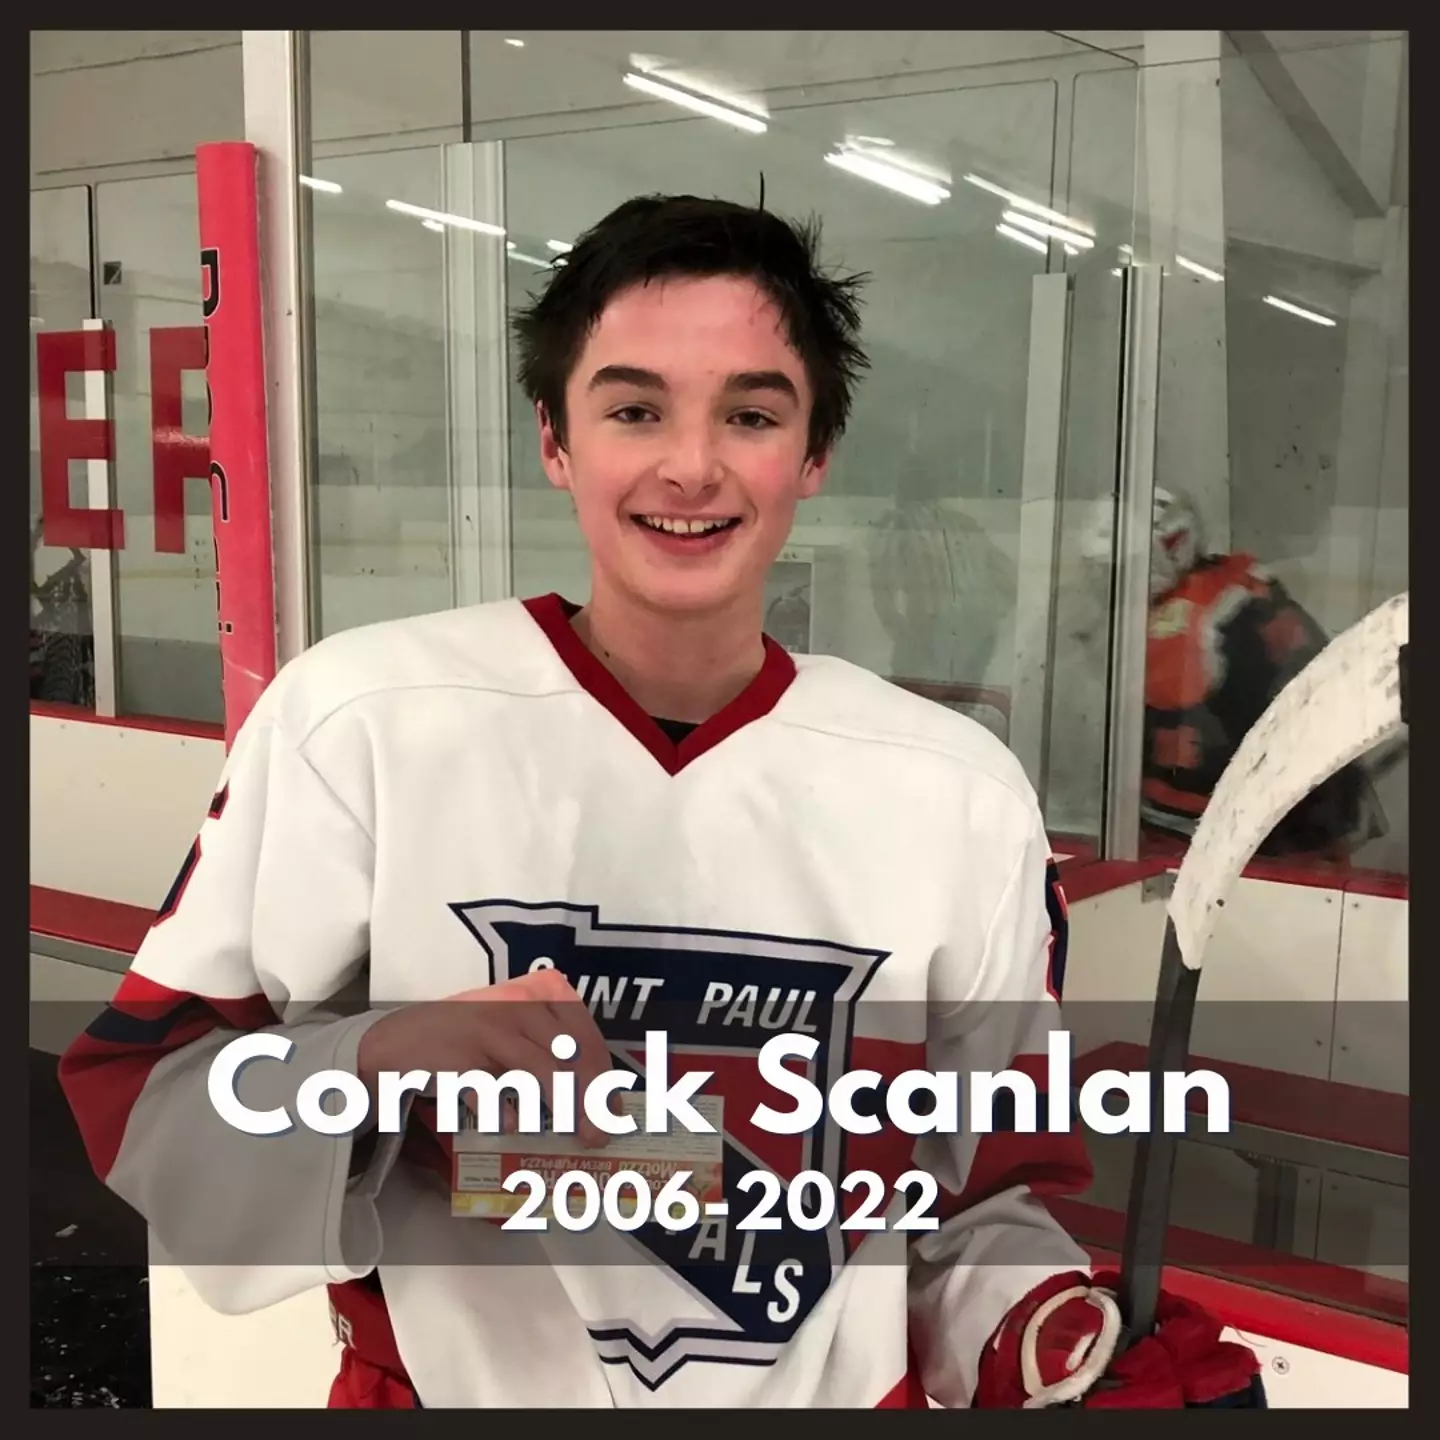 St Paul Capitals Hockey Assocation paid tribute to Cormick on Facebook.